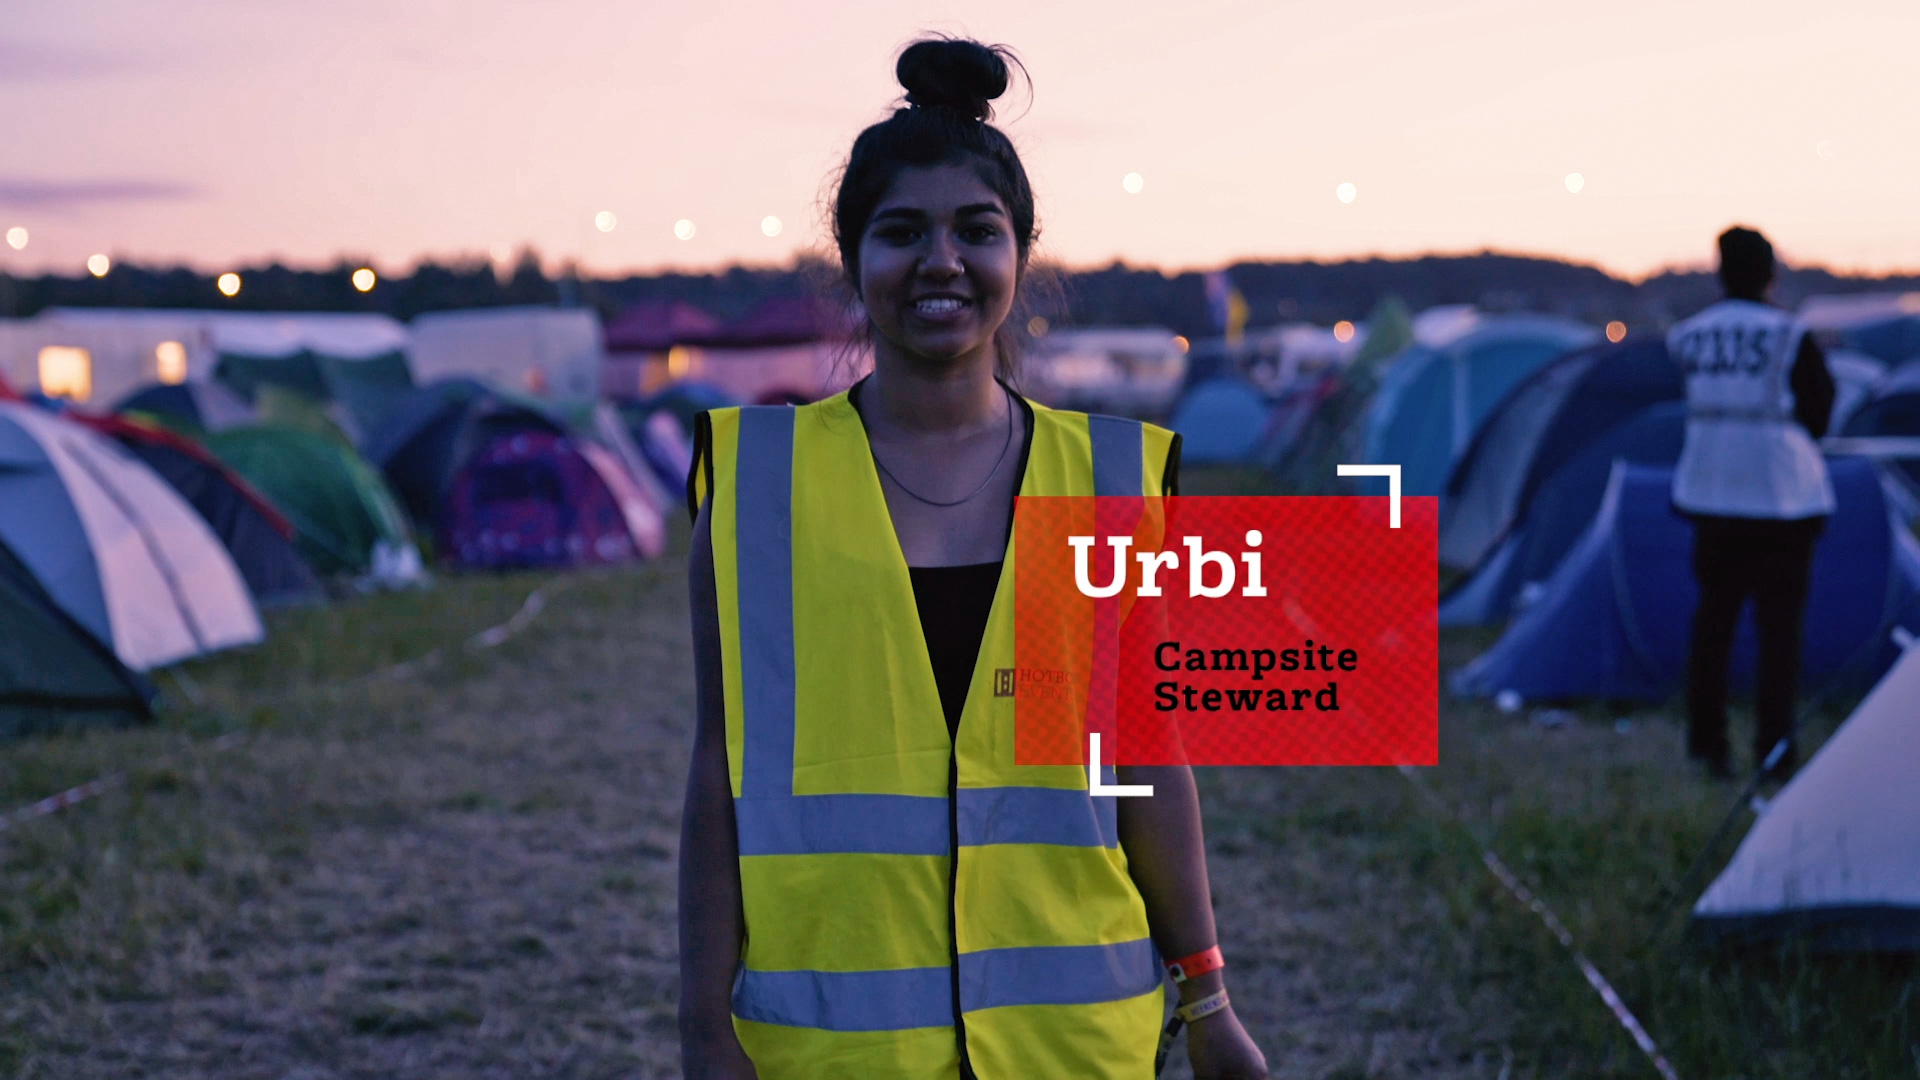 Urbi a Campsite Steward volunteering with Hotbox Events at Reading Festival!